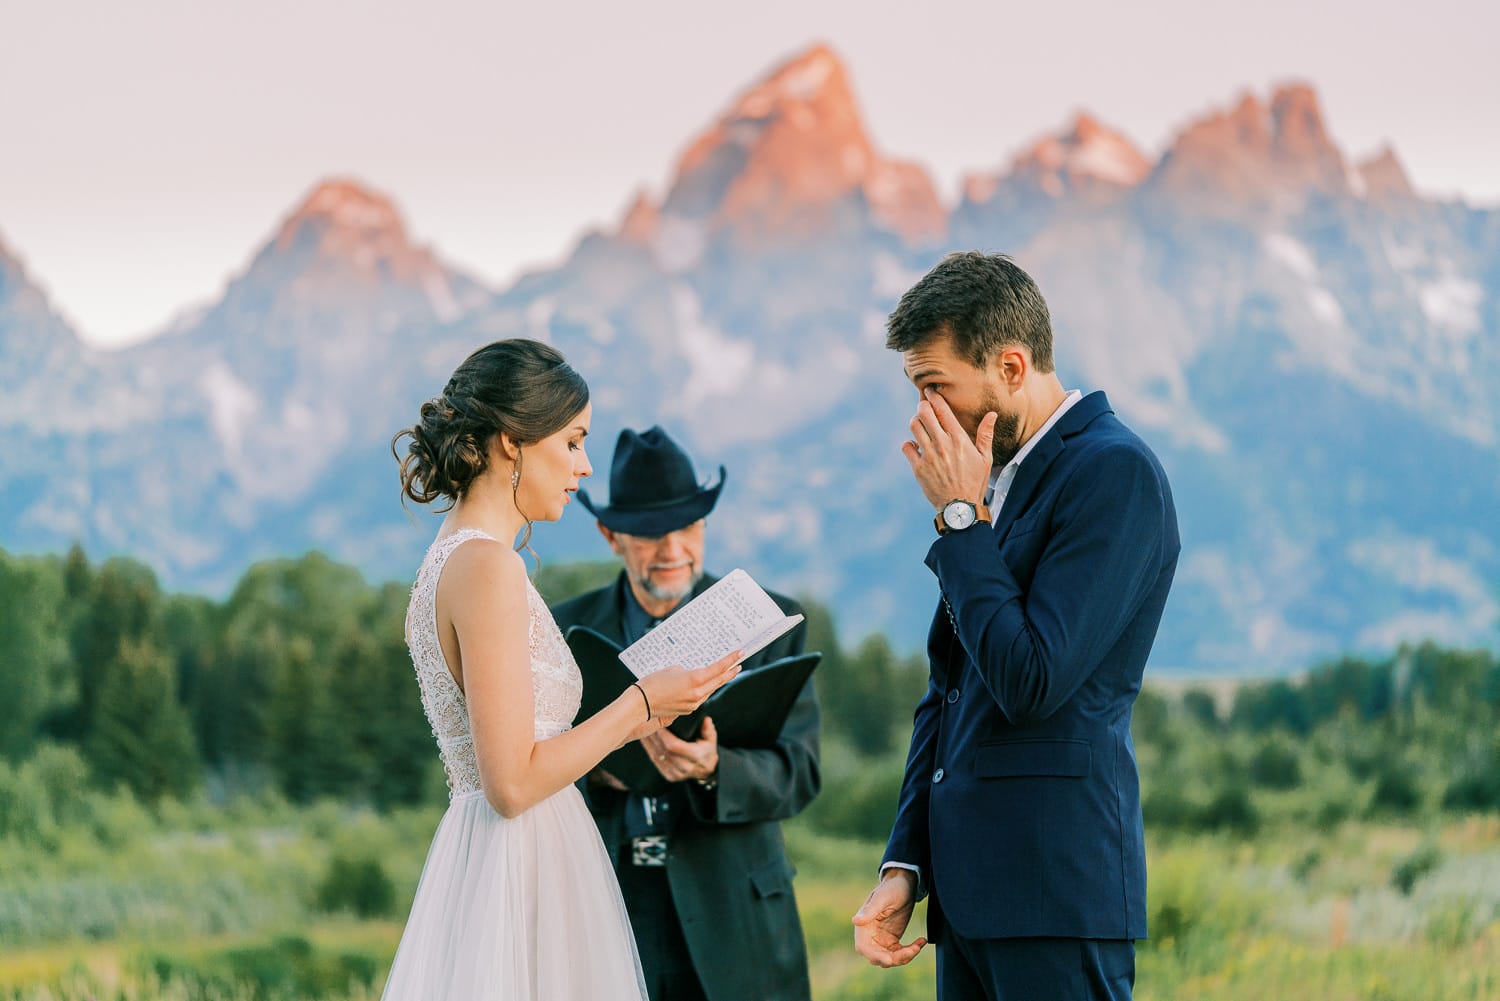 Groom wipes away tears at a wedding ceremony in Wyoming at sunrise.